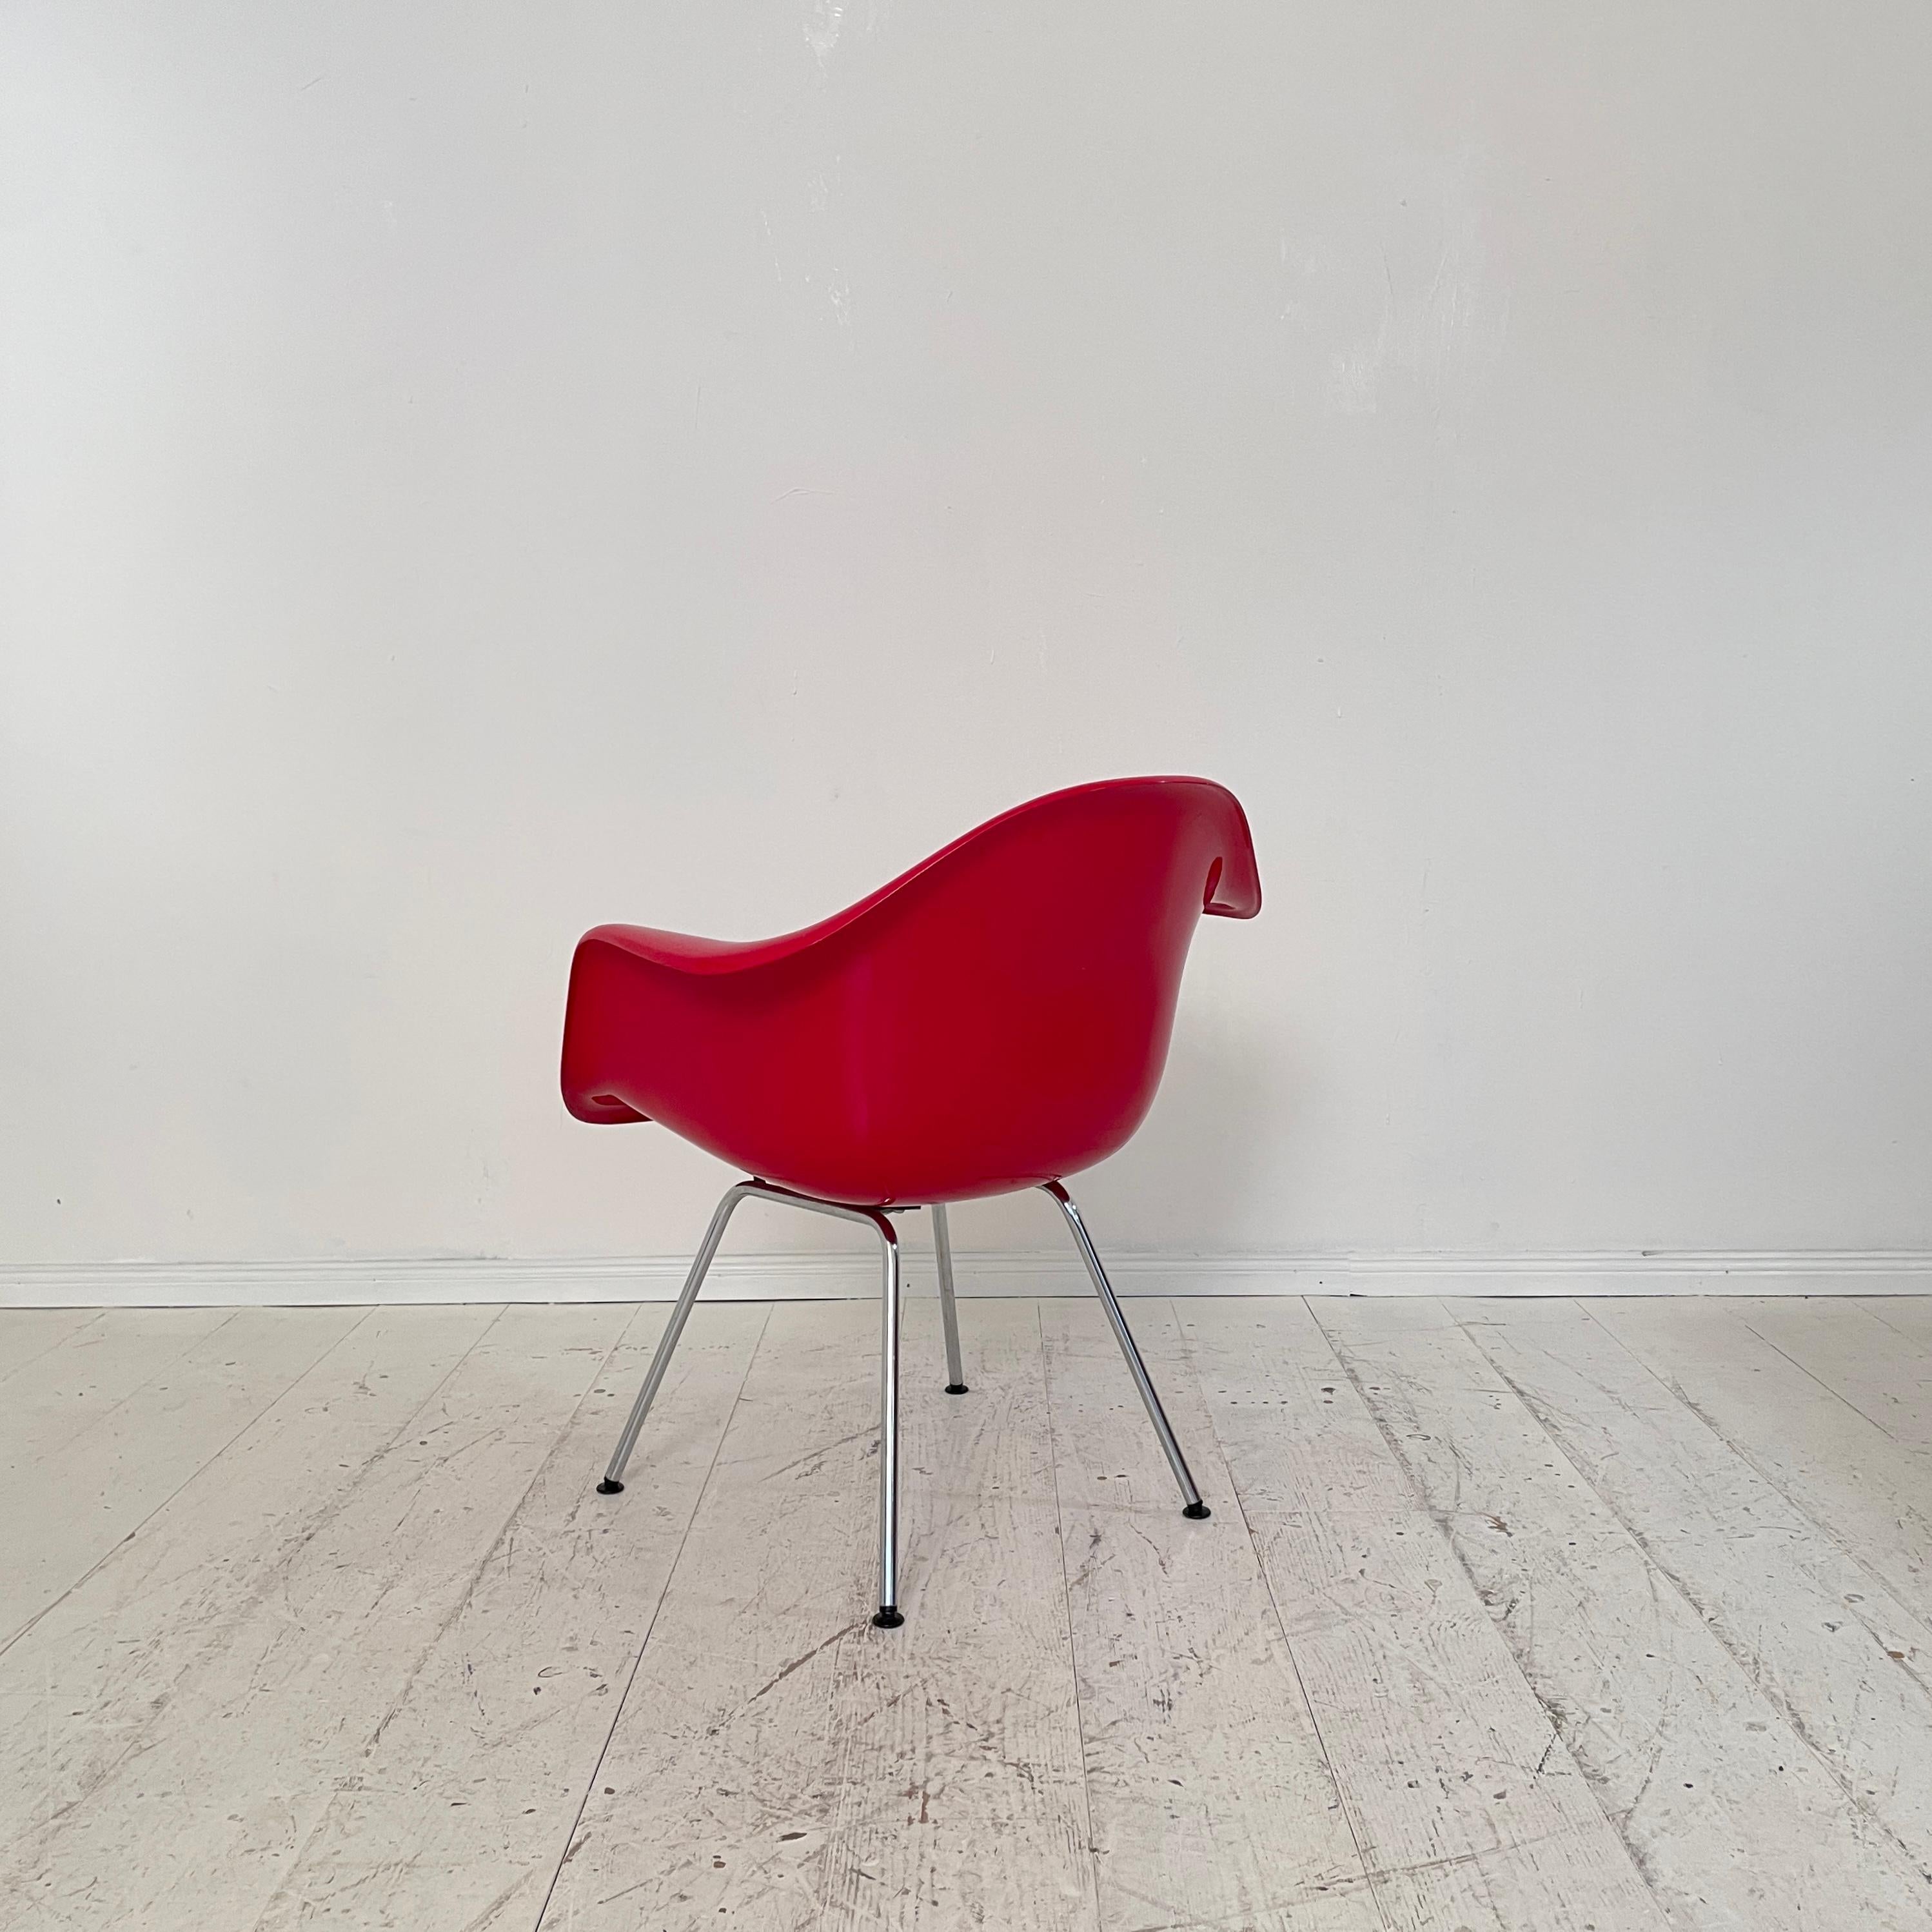 Mid-20th Century Red Dax Lounge Armchair by Charles & Ray Eames for Fehlbaum / Herman Miller 1966 For Sale